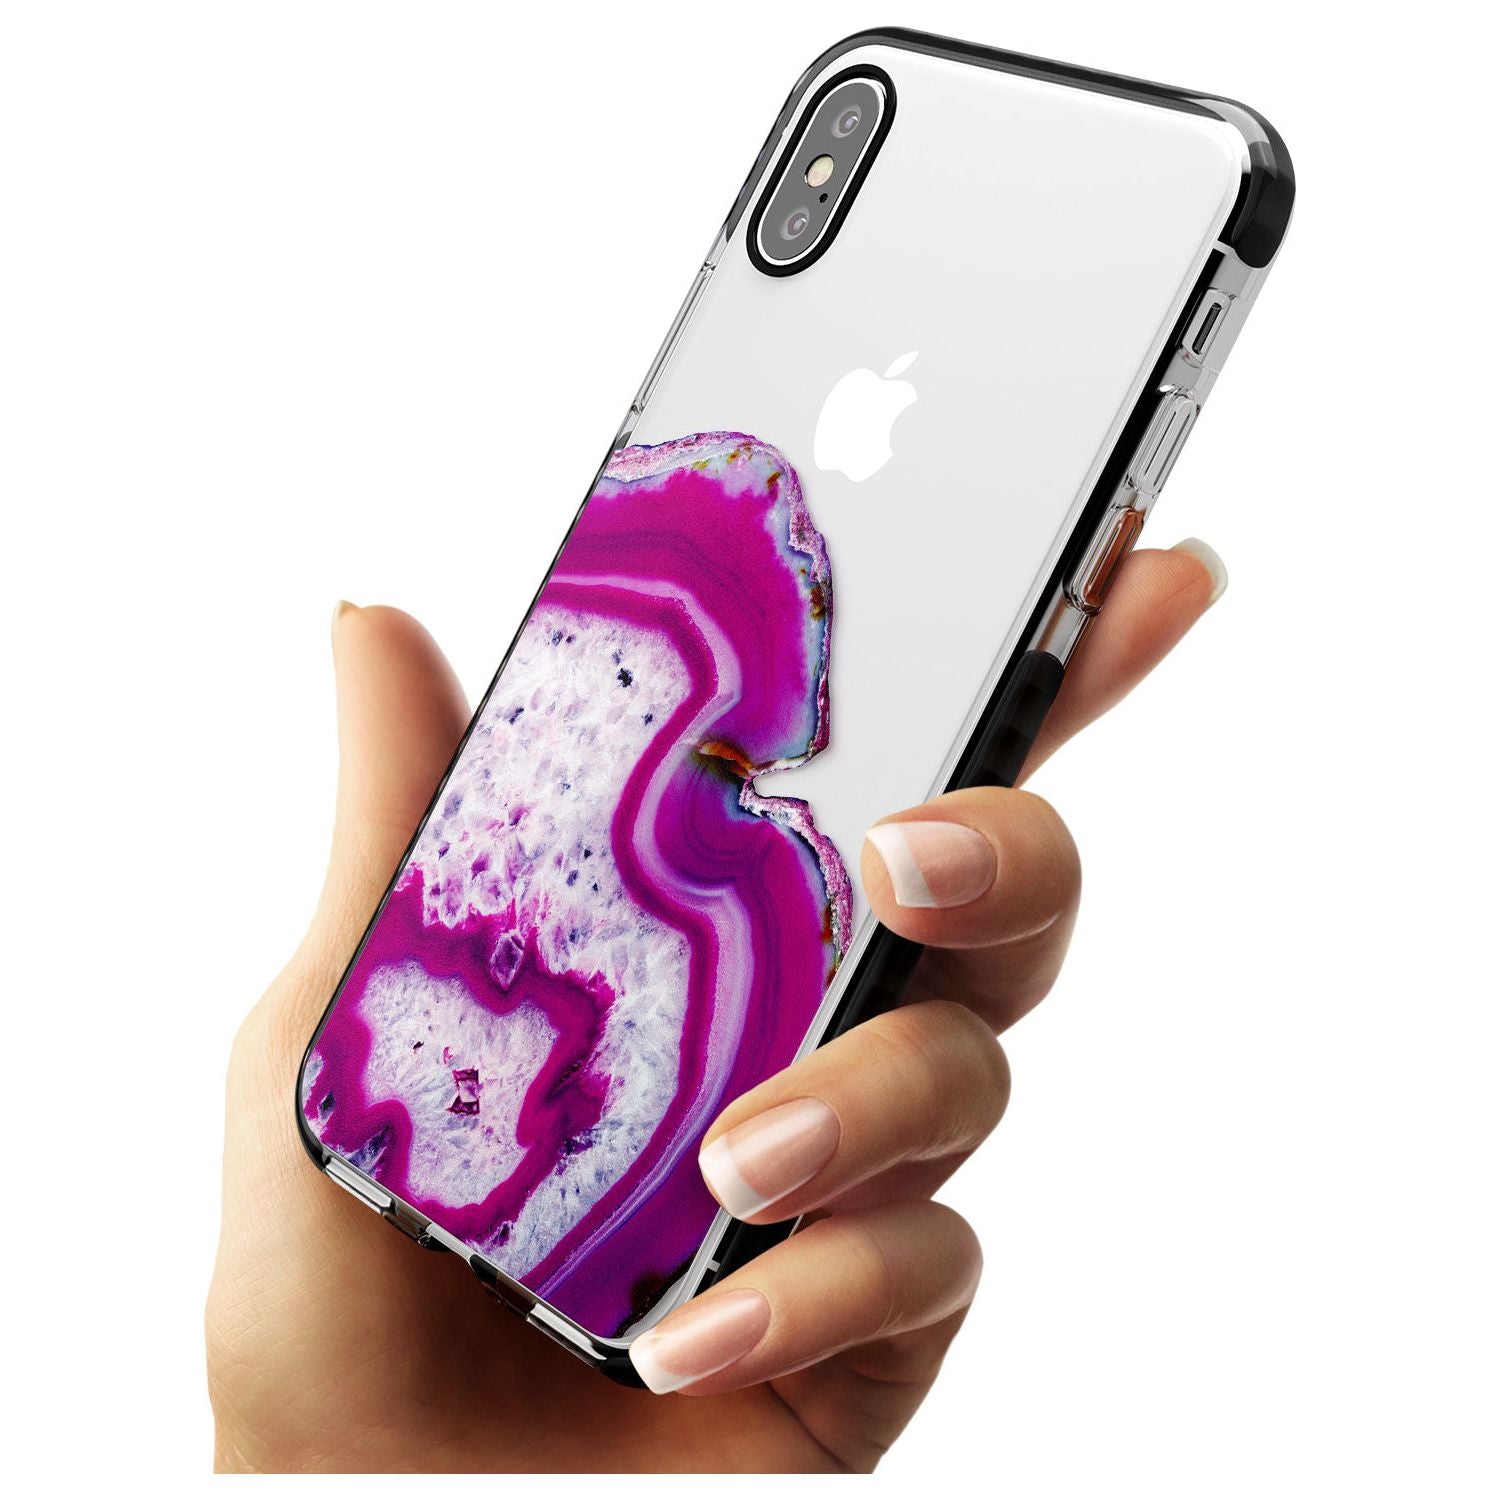 Violet & White Swirl Agate Crystal Clear Design Black Impact Phone Case for iPhone X XS Max XR